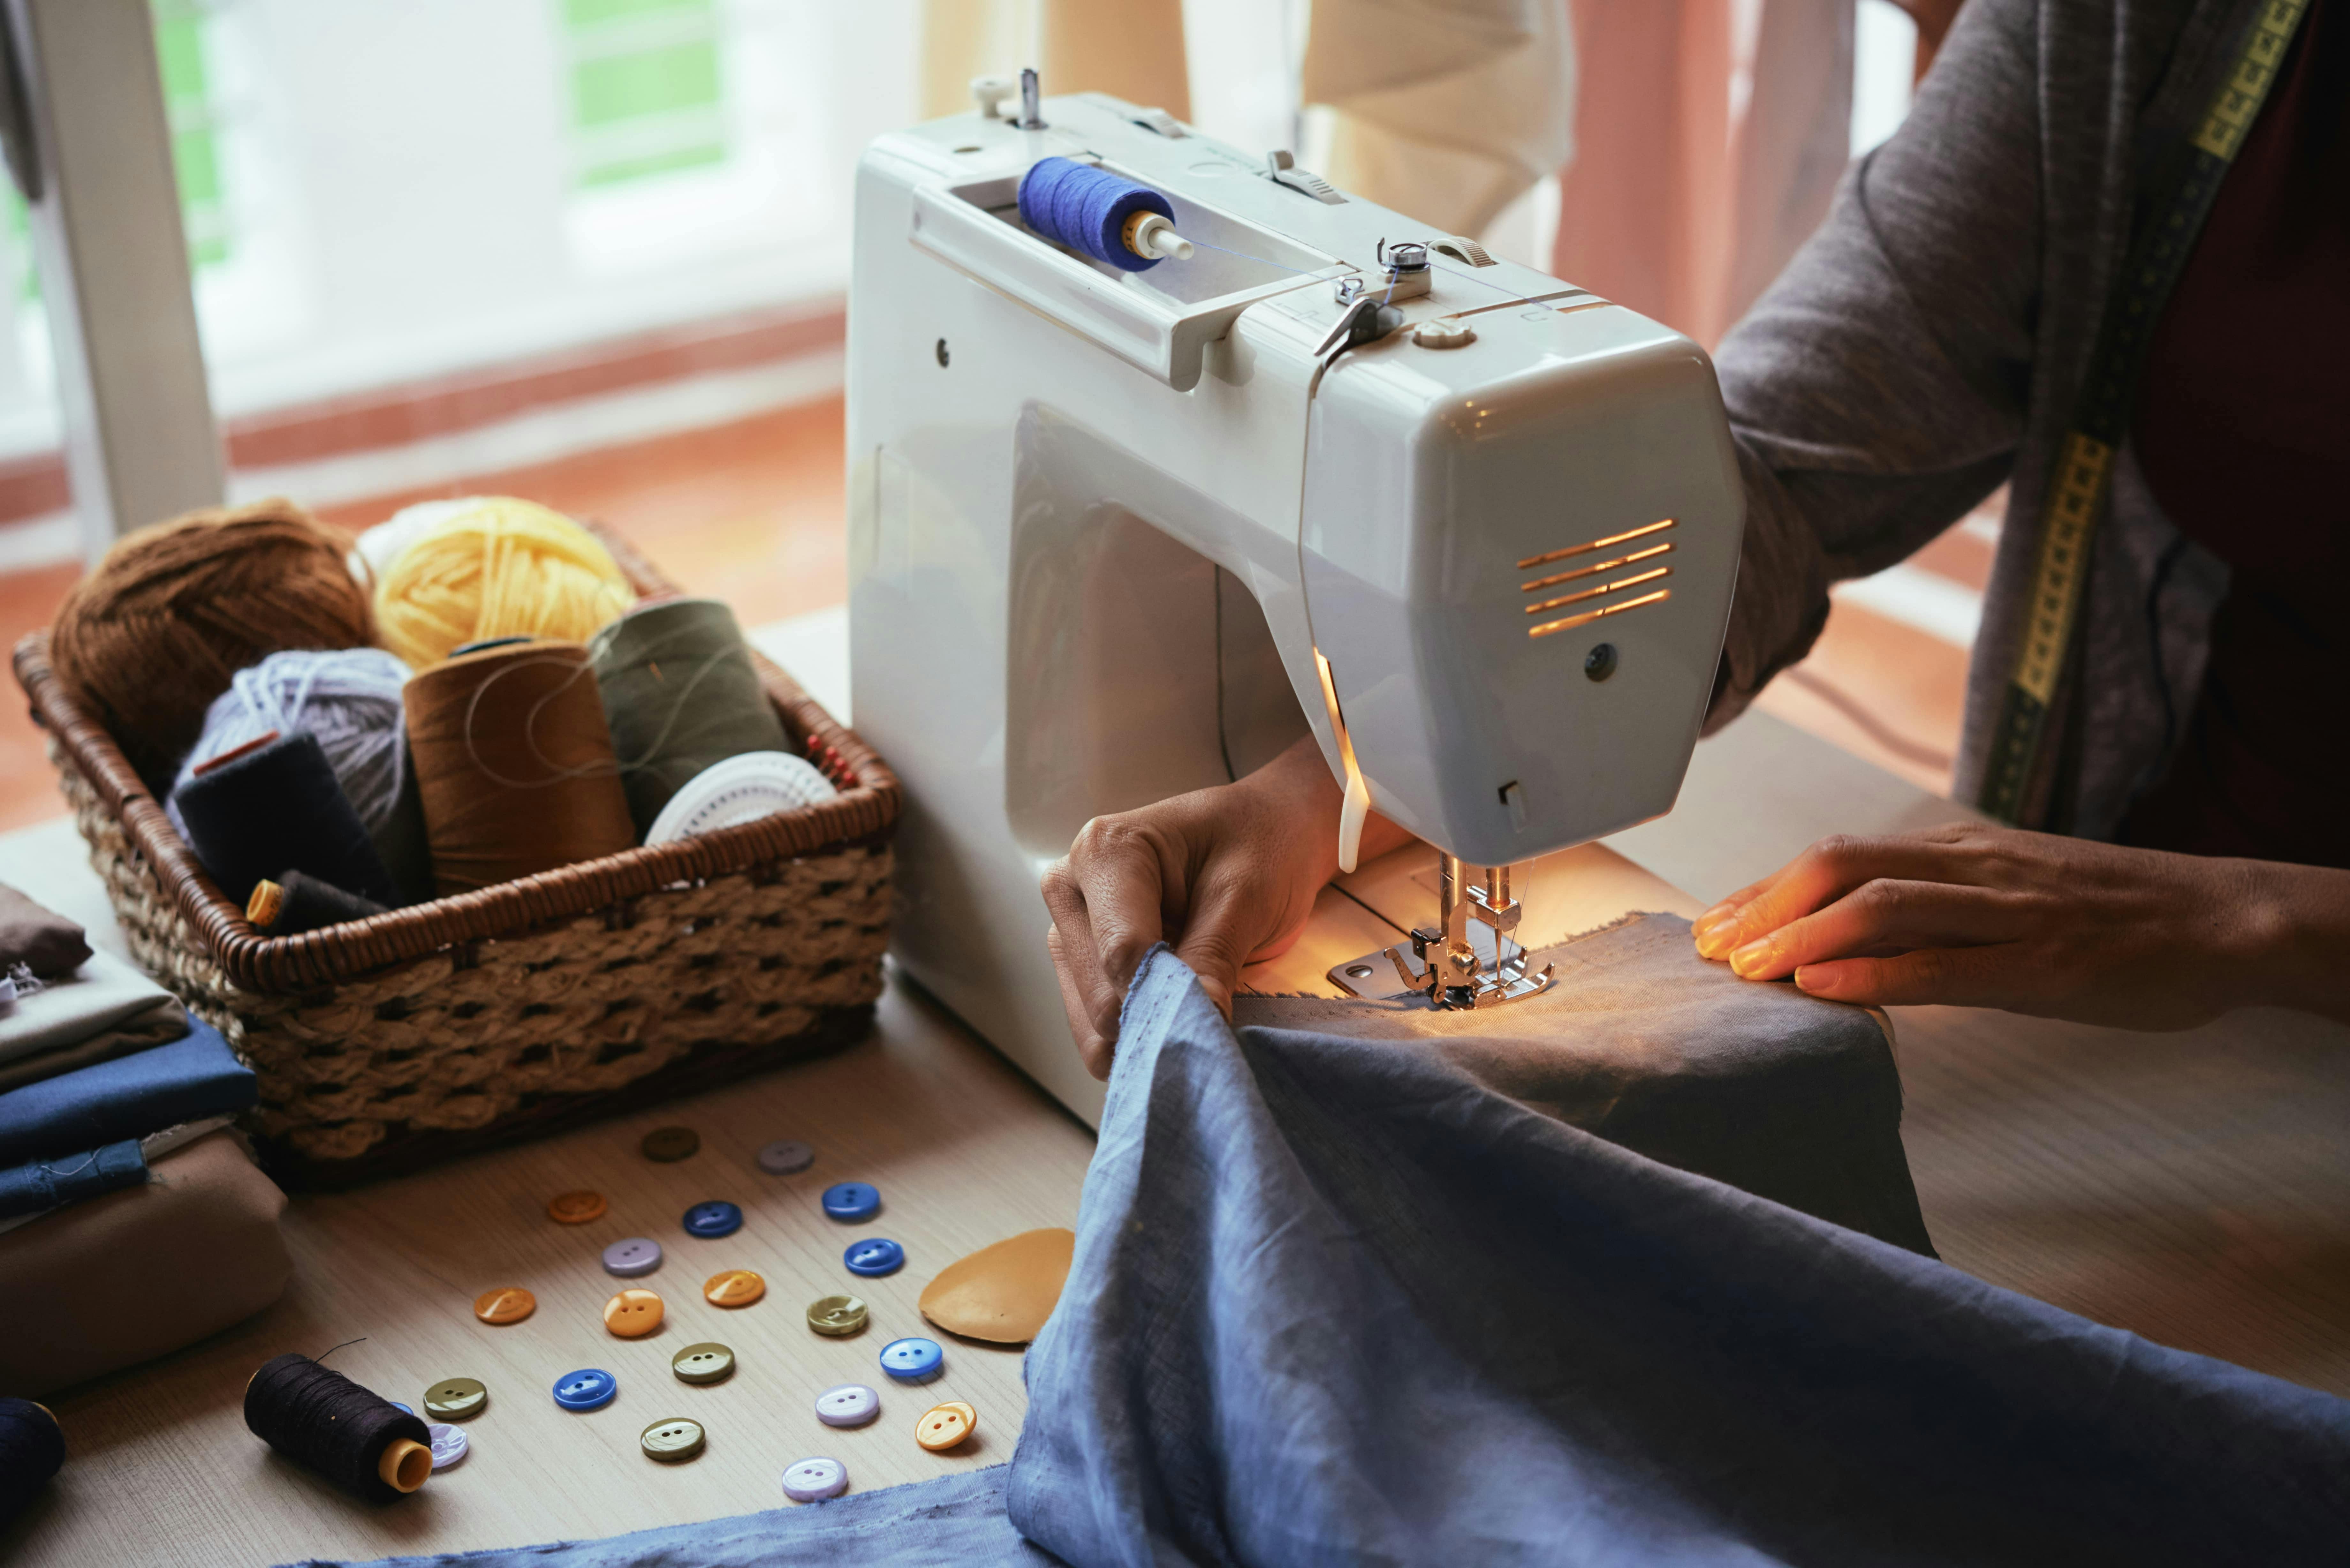  Image of person practicing sewing techniques using sewing machine with buttons and thread laid out